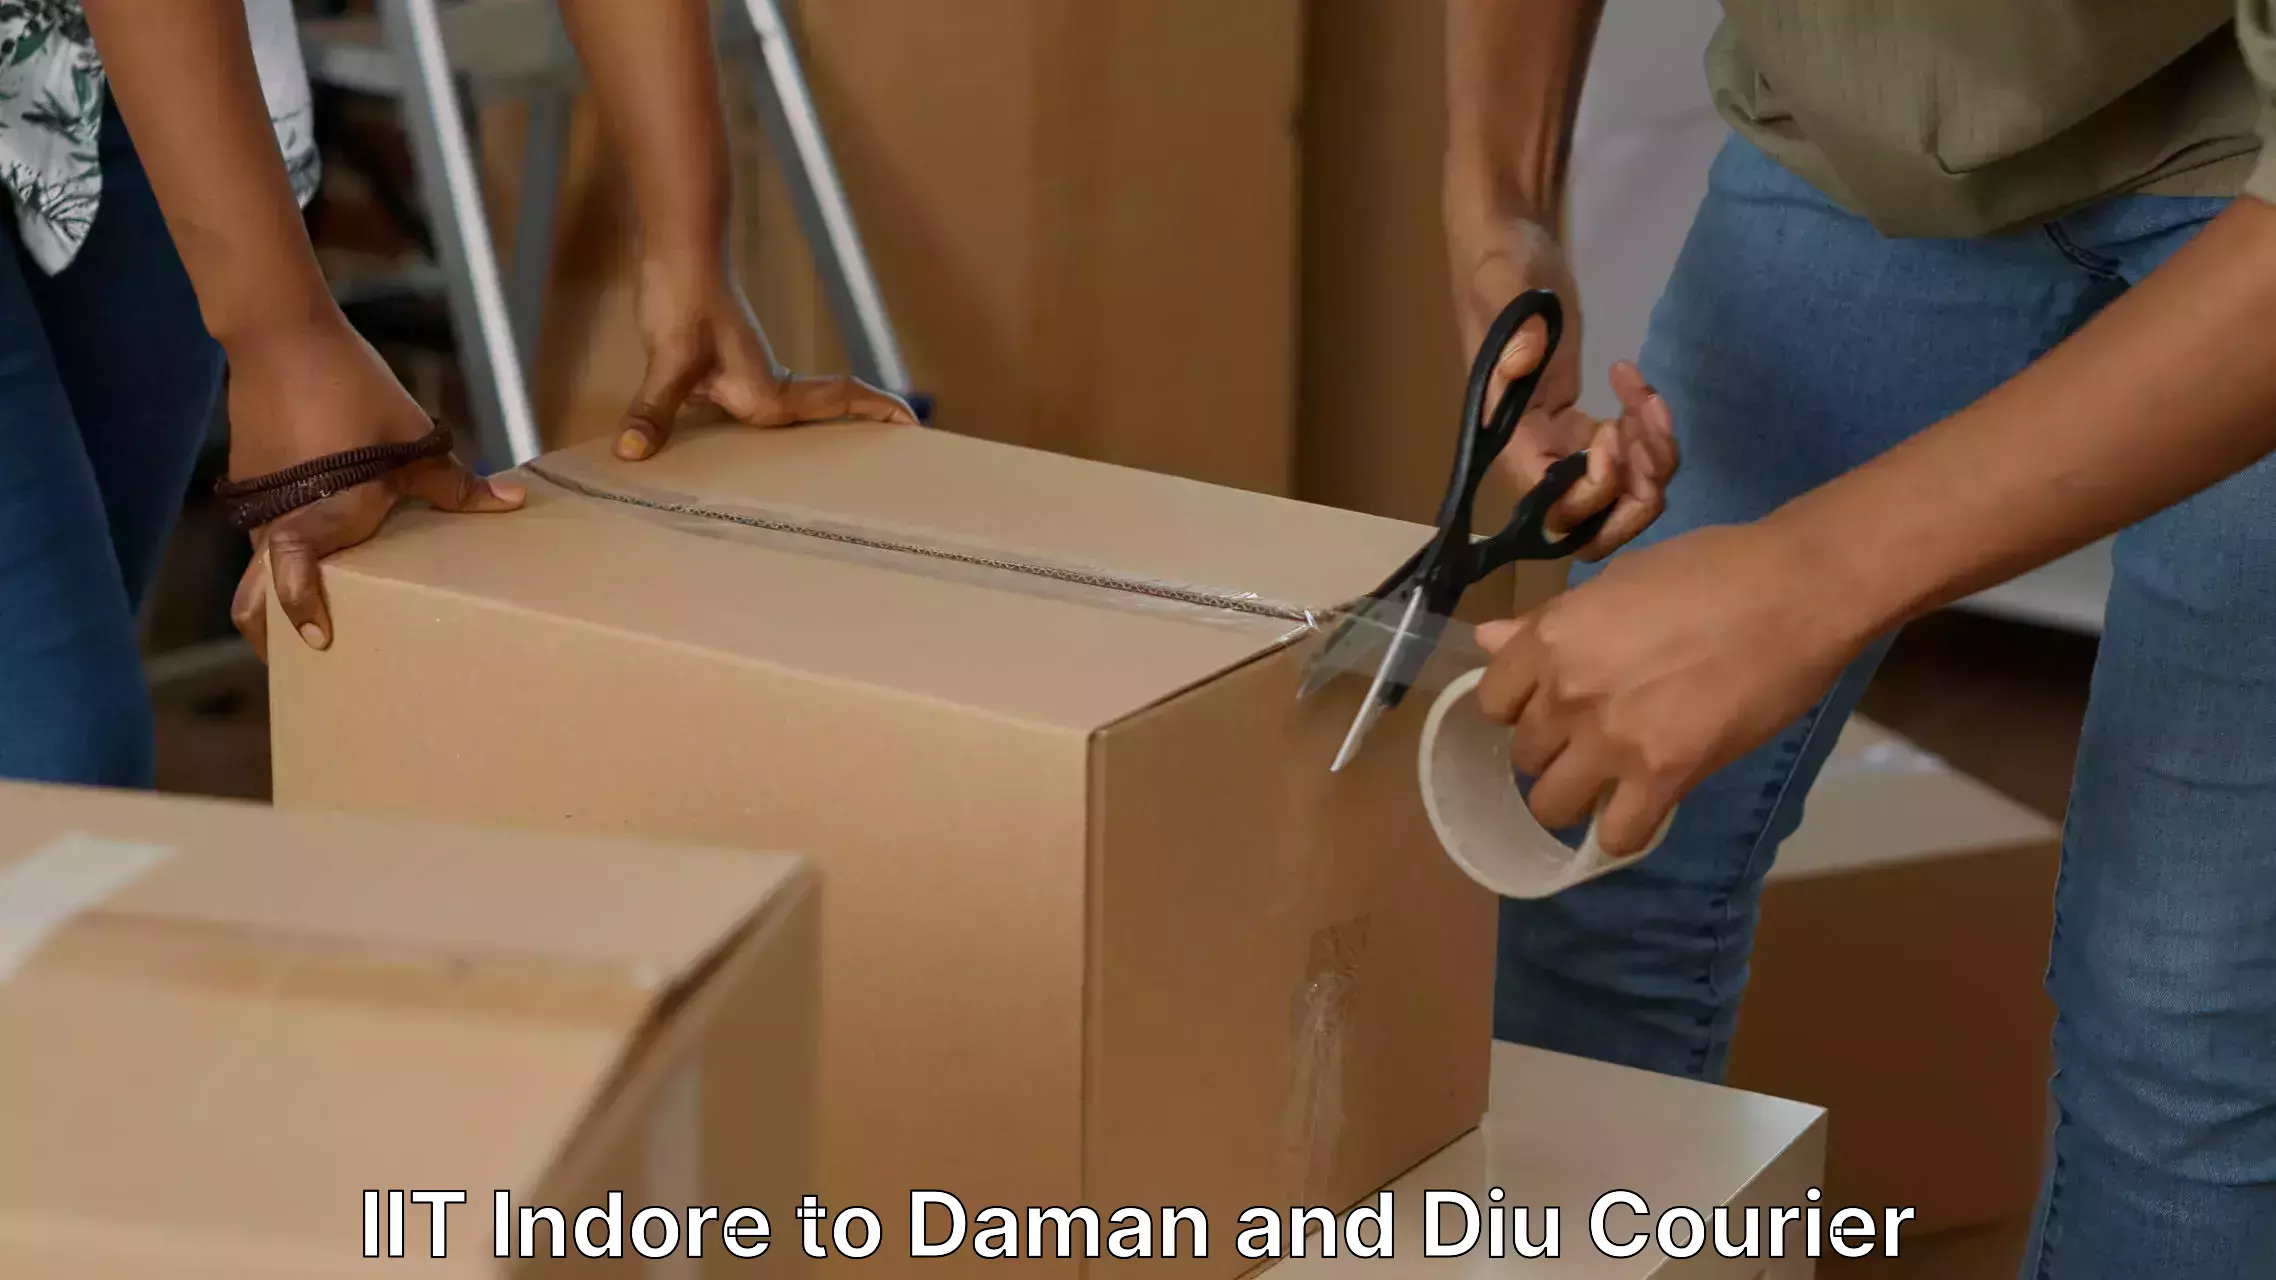 Full-service movers IIT Indore to Diu